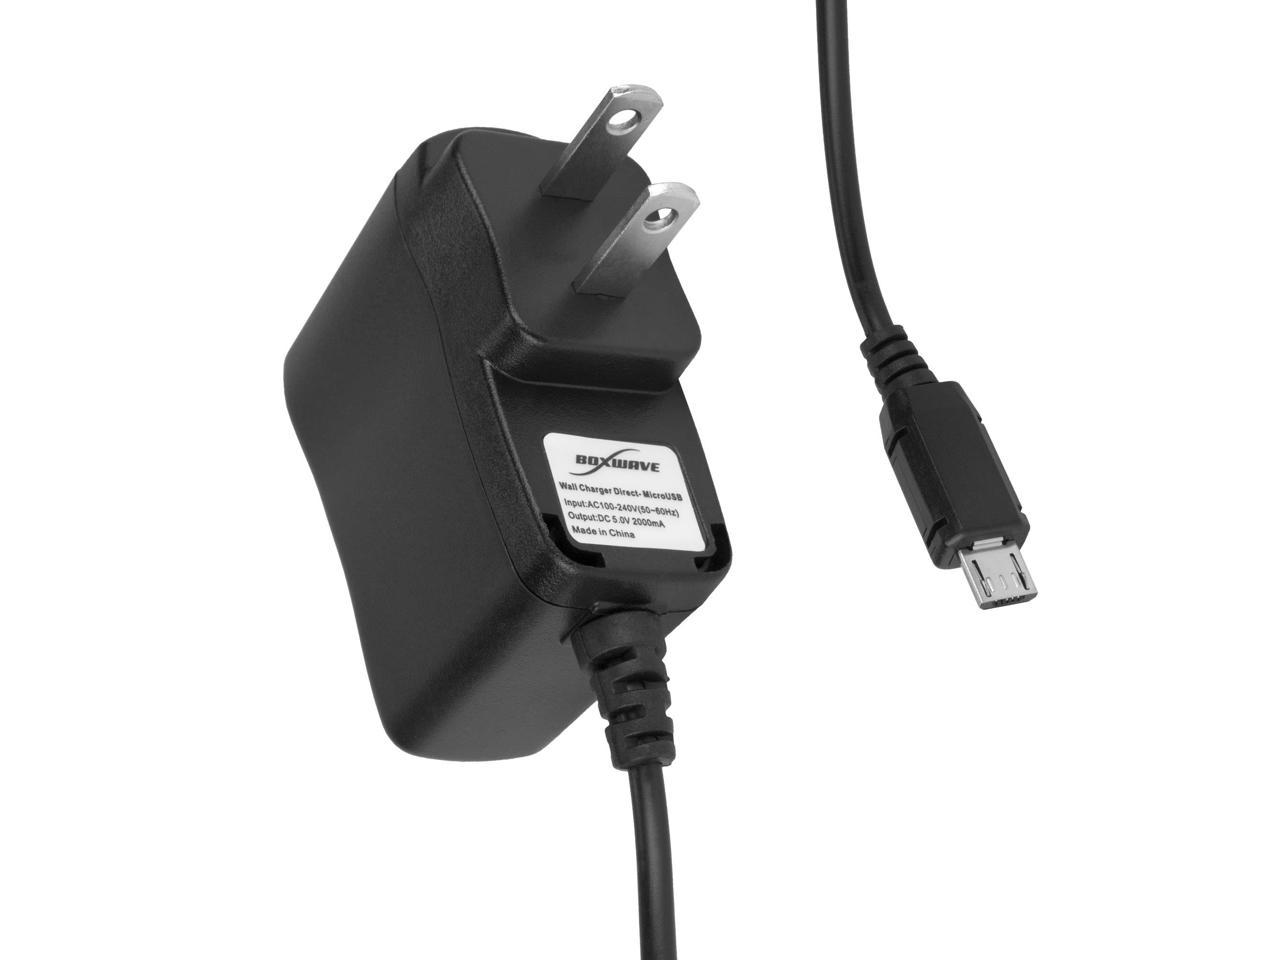 Charger Zebra ET50 10.1 in Wall Plug Charger for Zebra ET50 BoxWave Wall Charger Direct 10.1 in